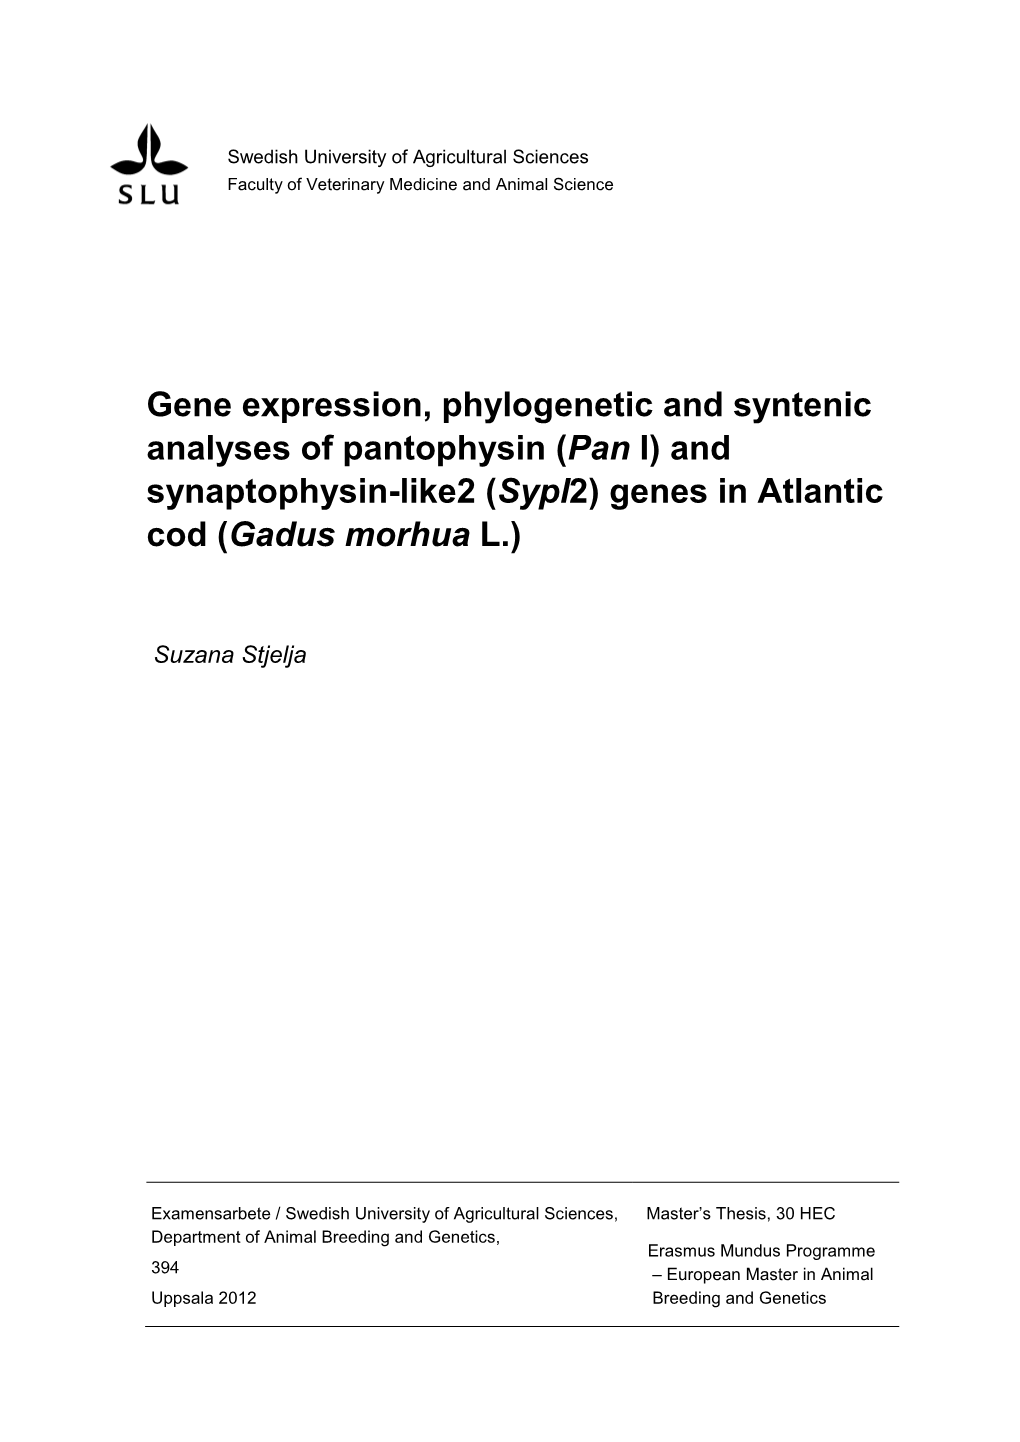 Gene Expression, Phylogenetic and Syntenic Analyses of Pantophysin (Pan I) and Synaptophysin-Like2 (Sypl2) Genes in Atlantic Cod (Gadus Morhua L.)